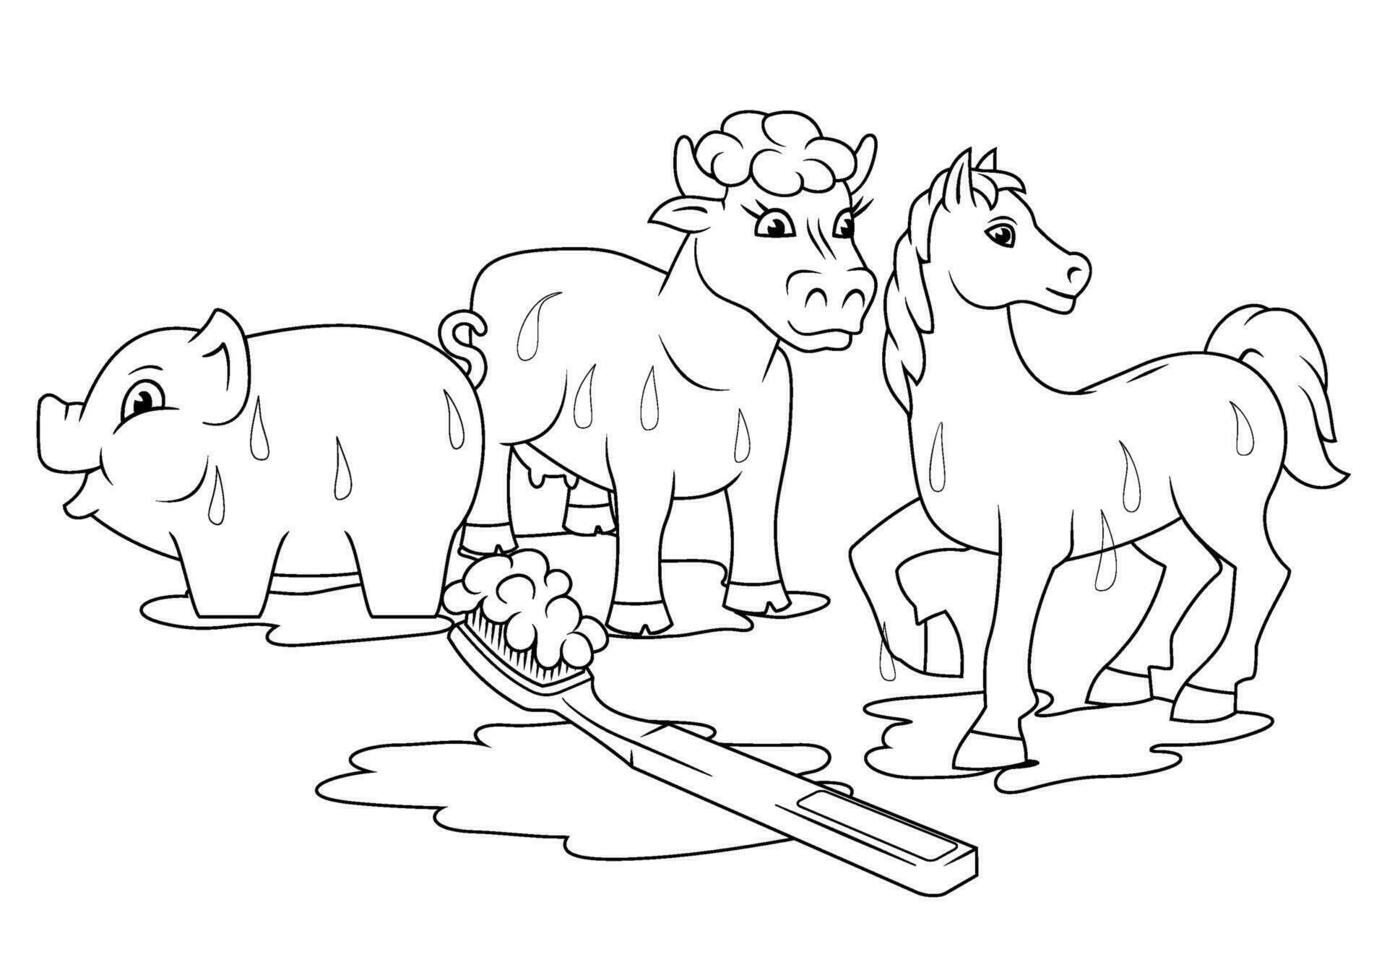 Washing Toys. Coloring page for kids. vector